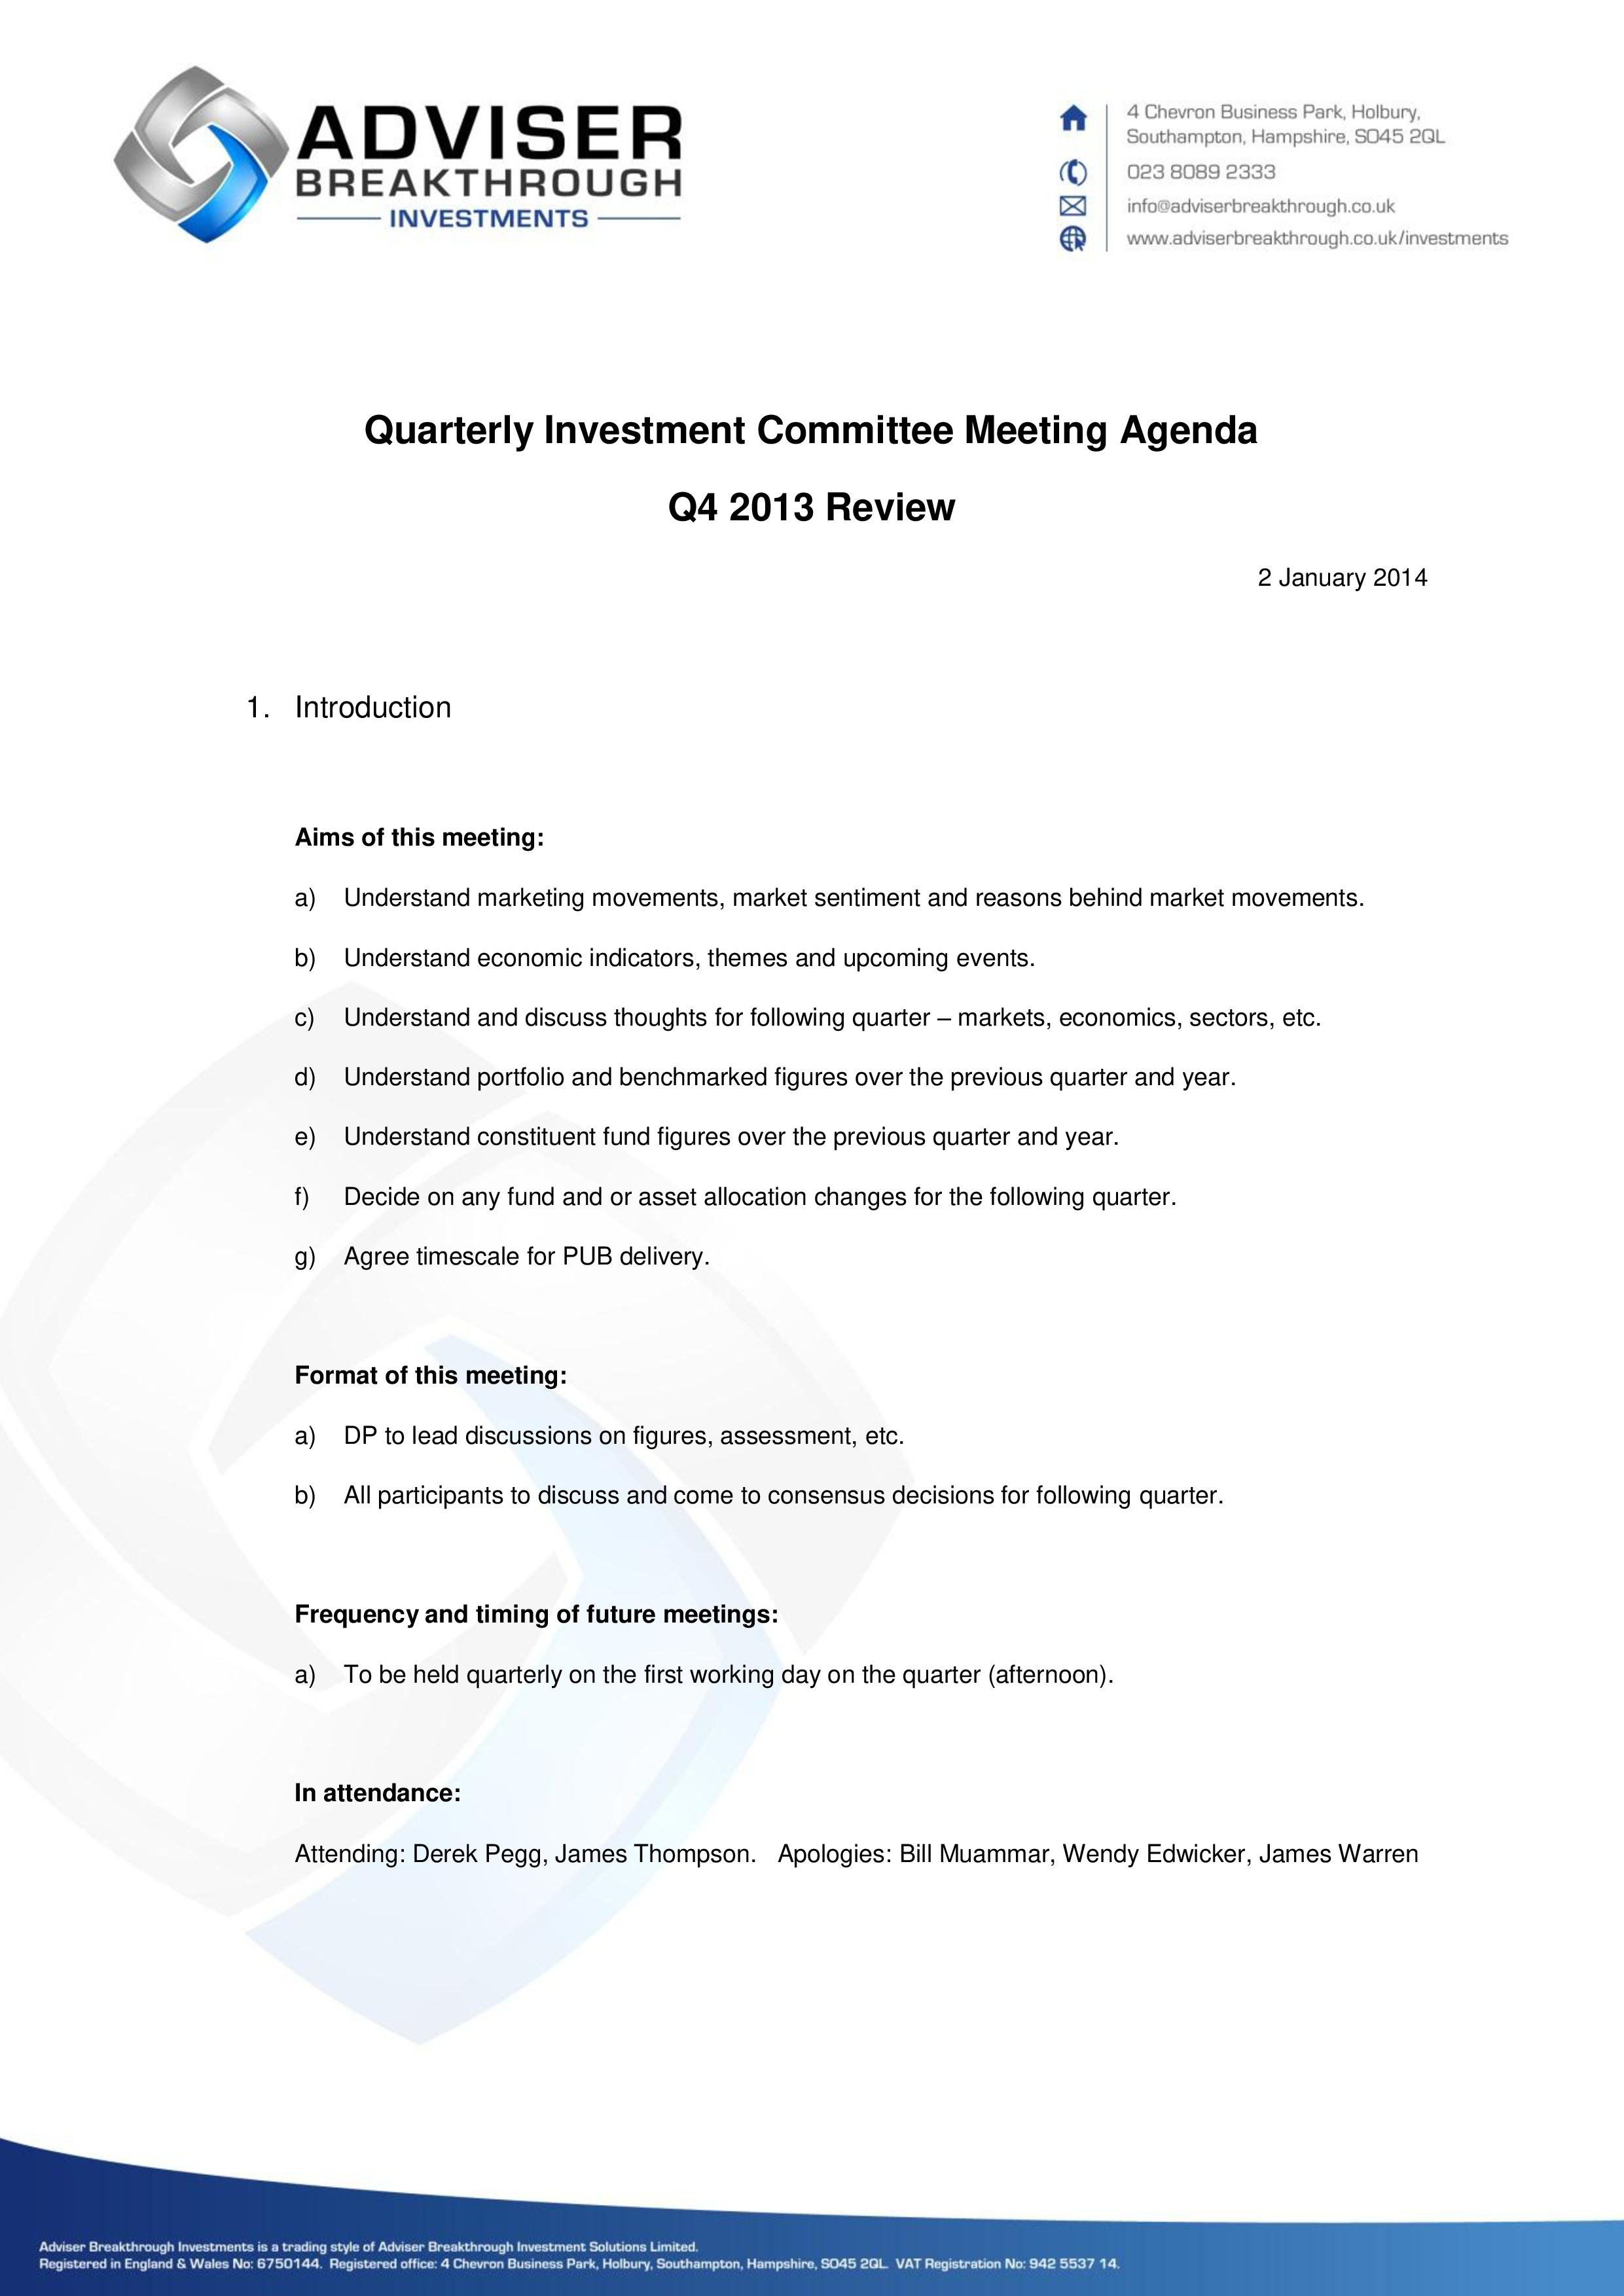 investment committee agenda template